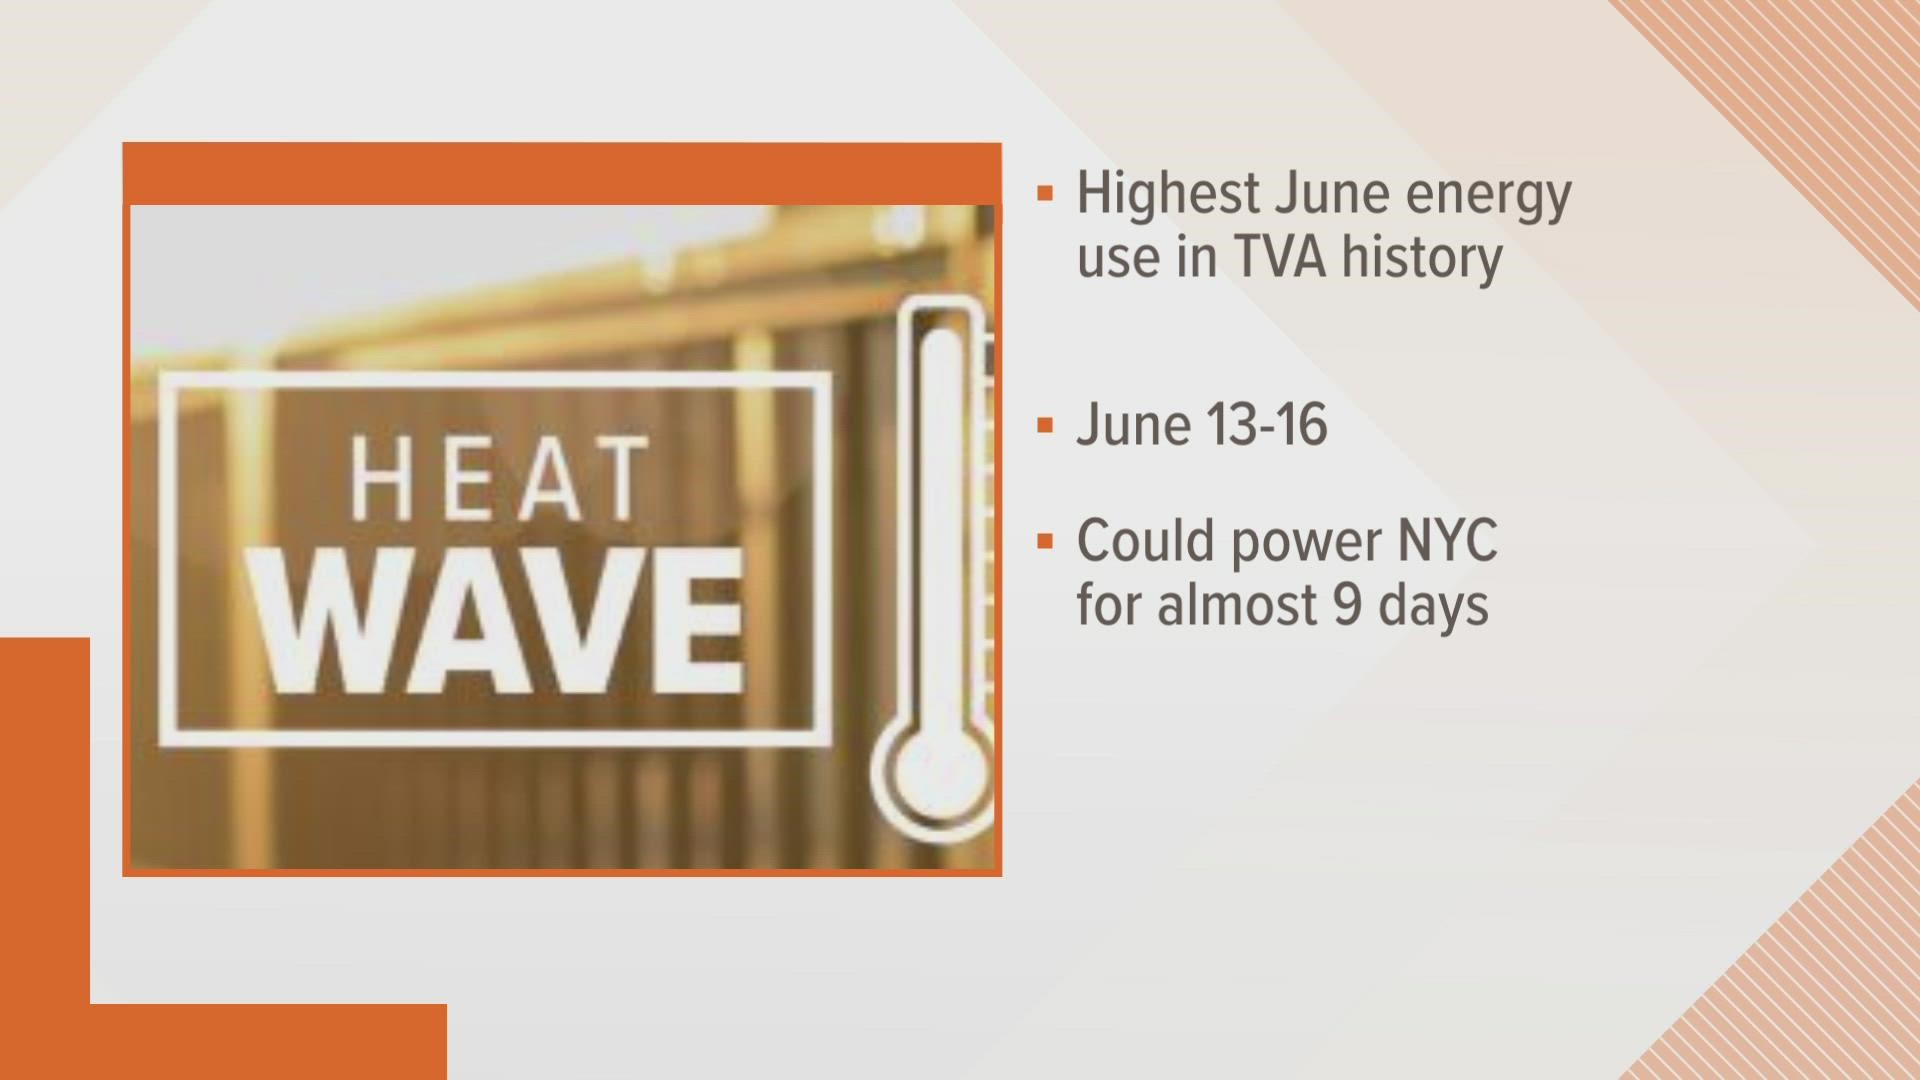 From June 13th to 16th, customers of the utility giant used enough power to light up New York City for almost nine days.